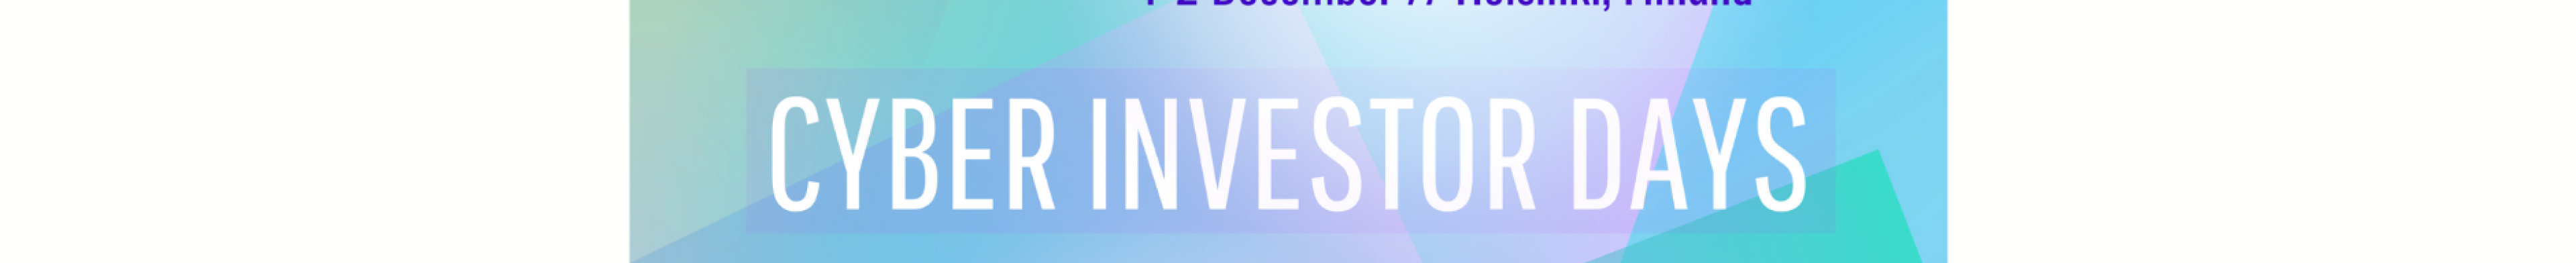 banner-cyber-investor-days.png